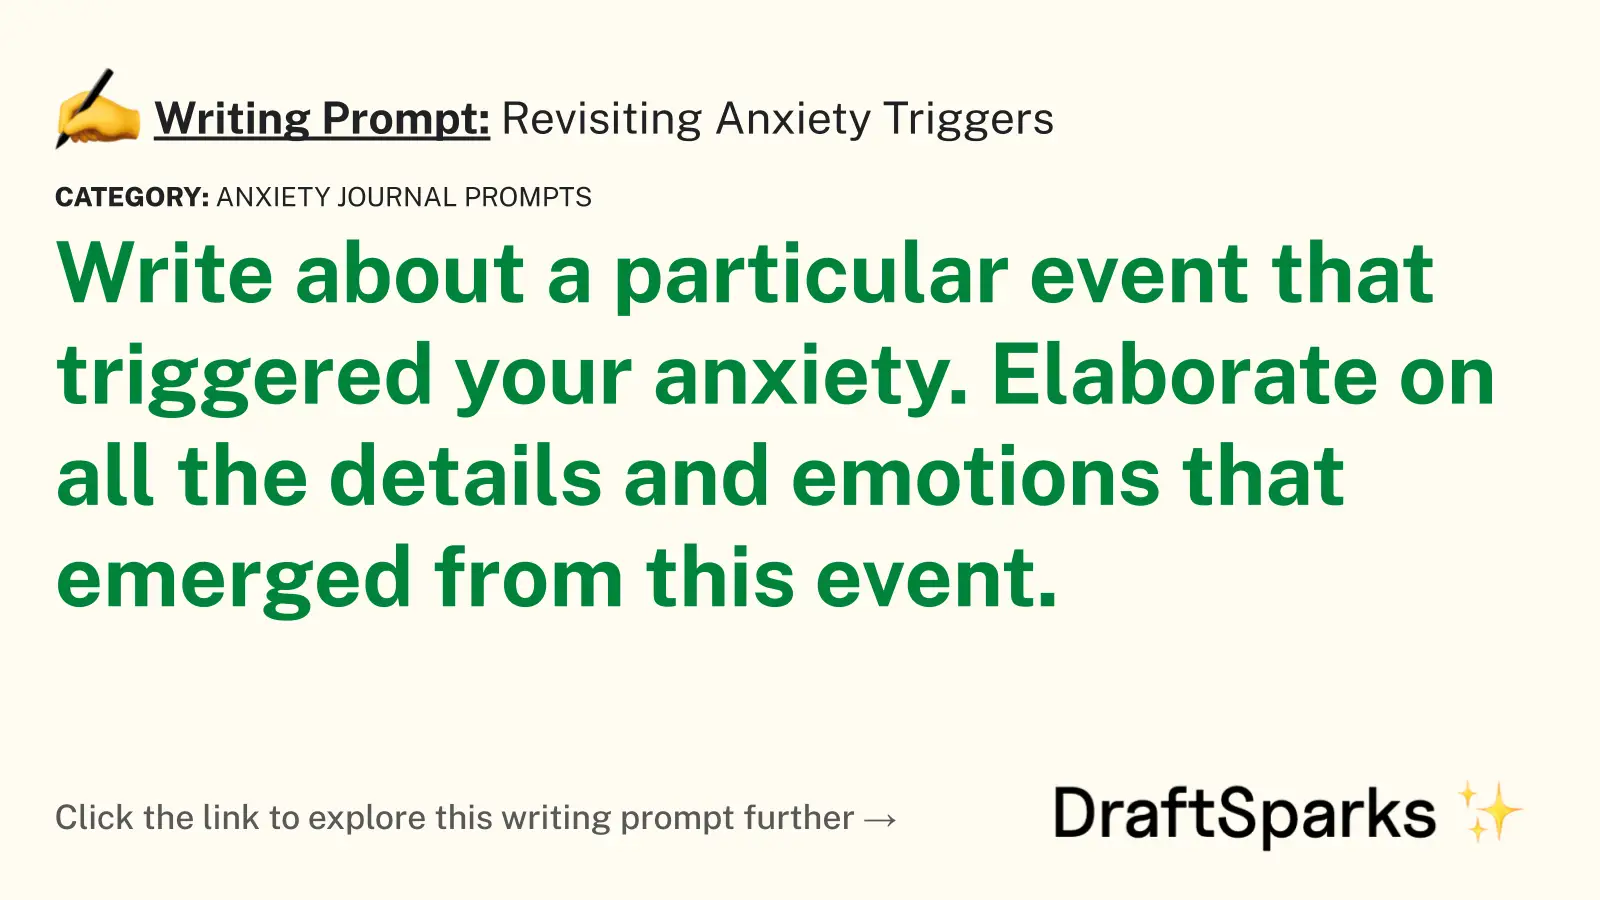 Revisiting Anxiety Triggers